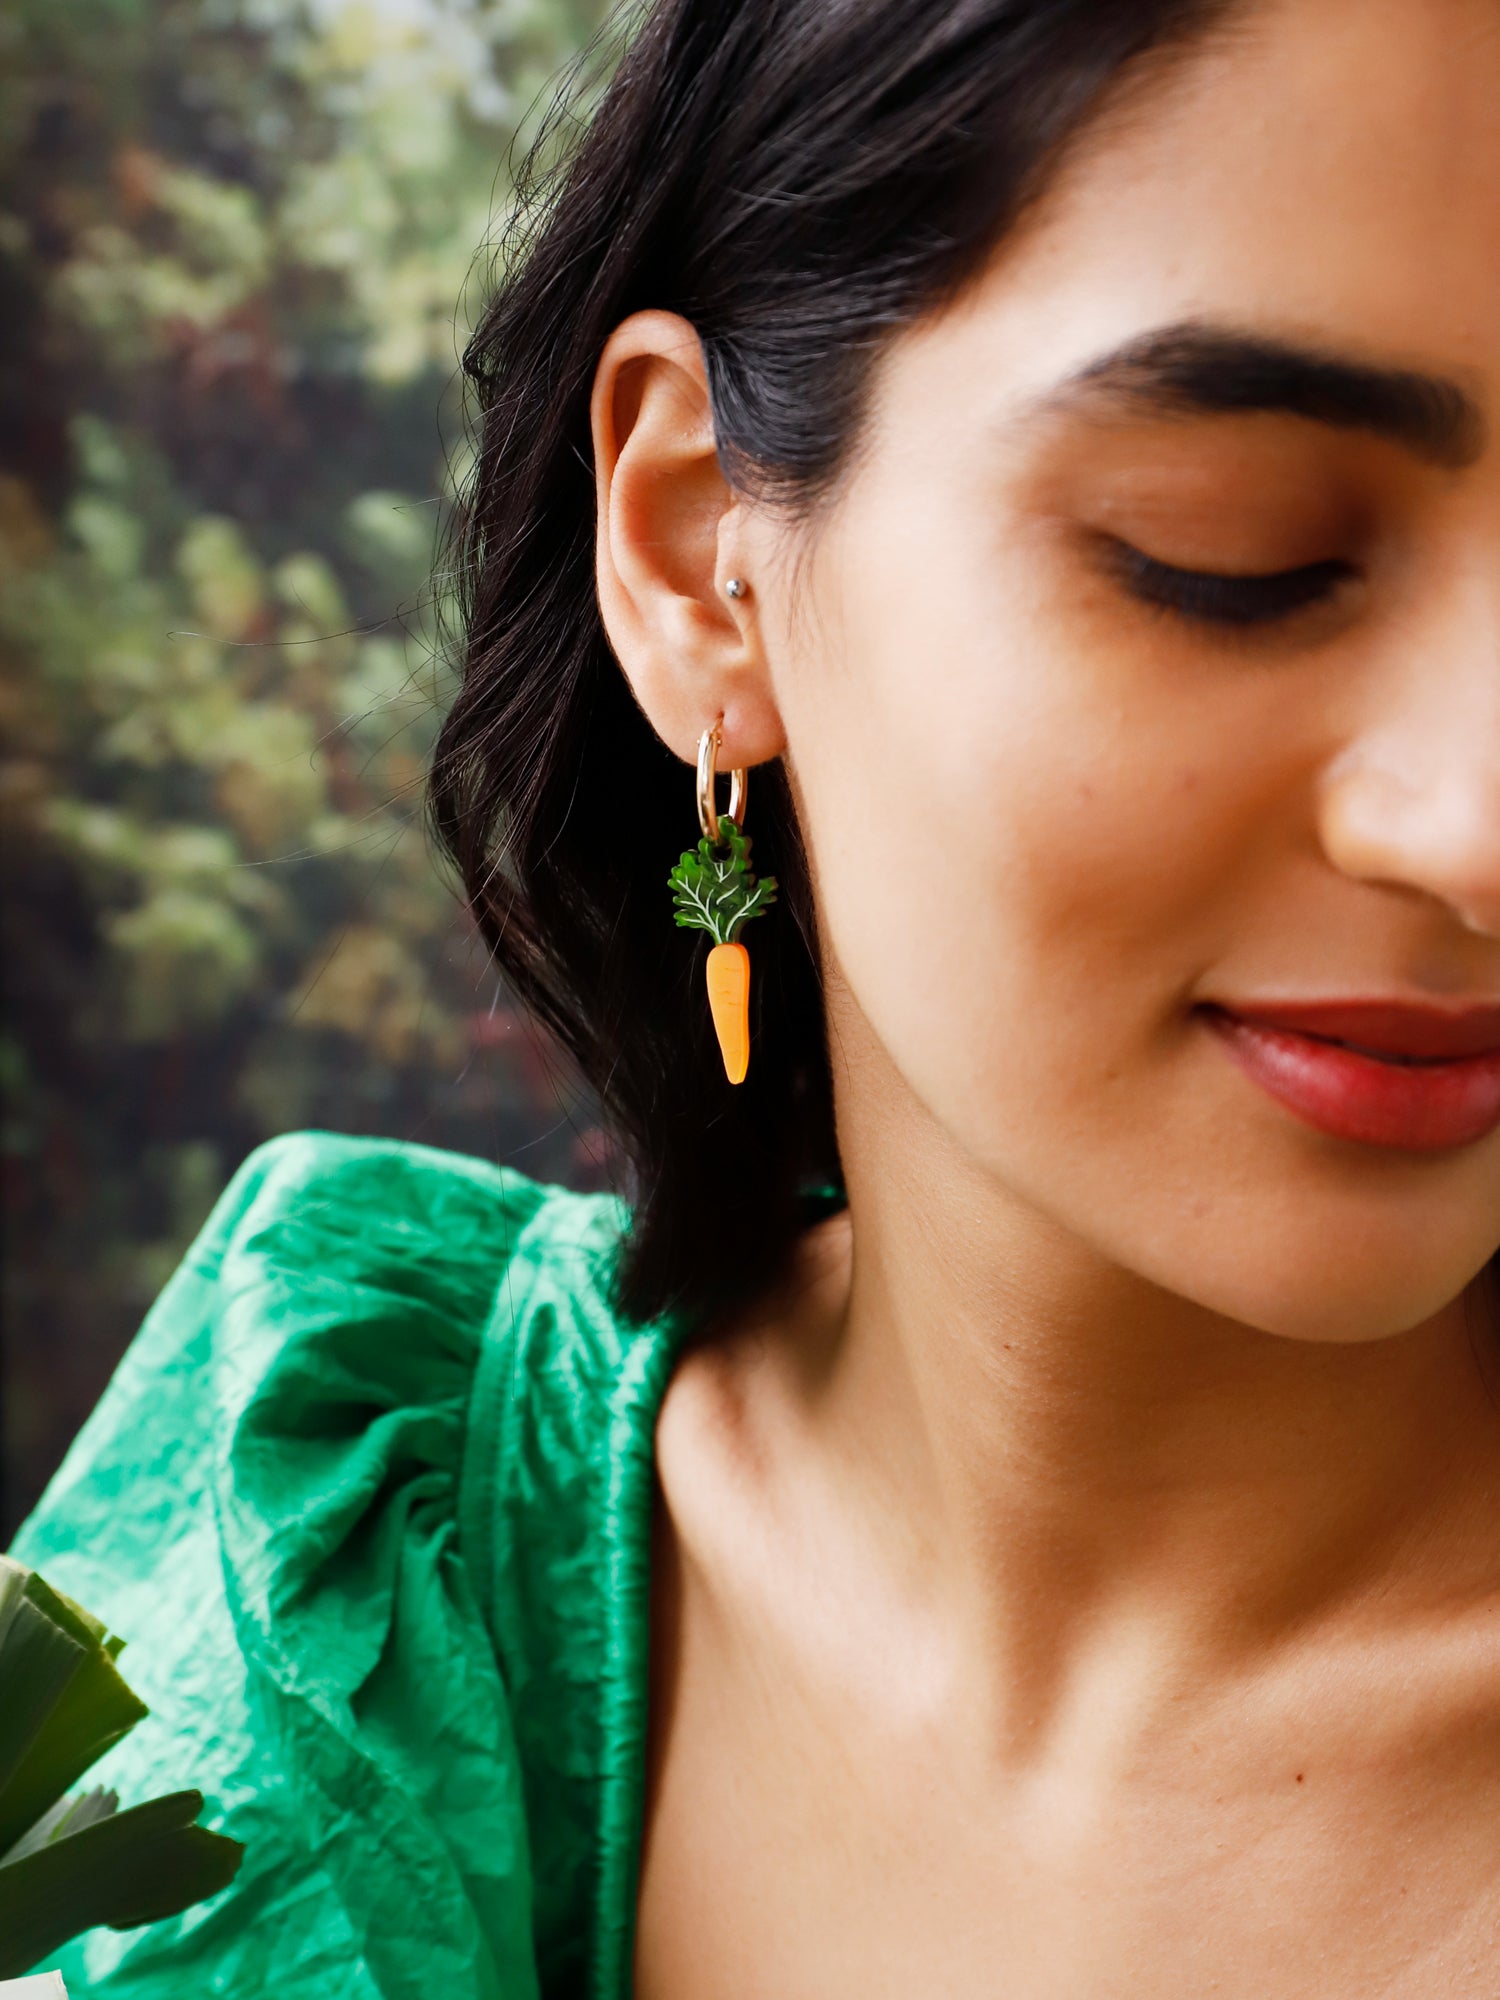 Orange and green carrot charm acrylic earrings with optional gold-filled hoops. Handmade in London by Wolf & Moon.